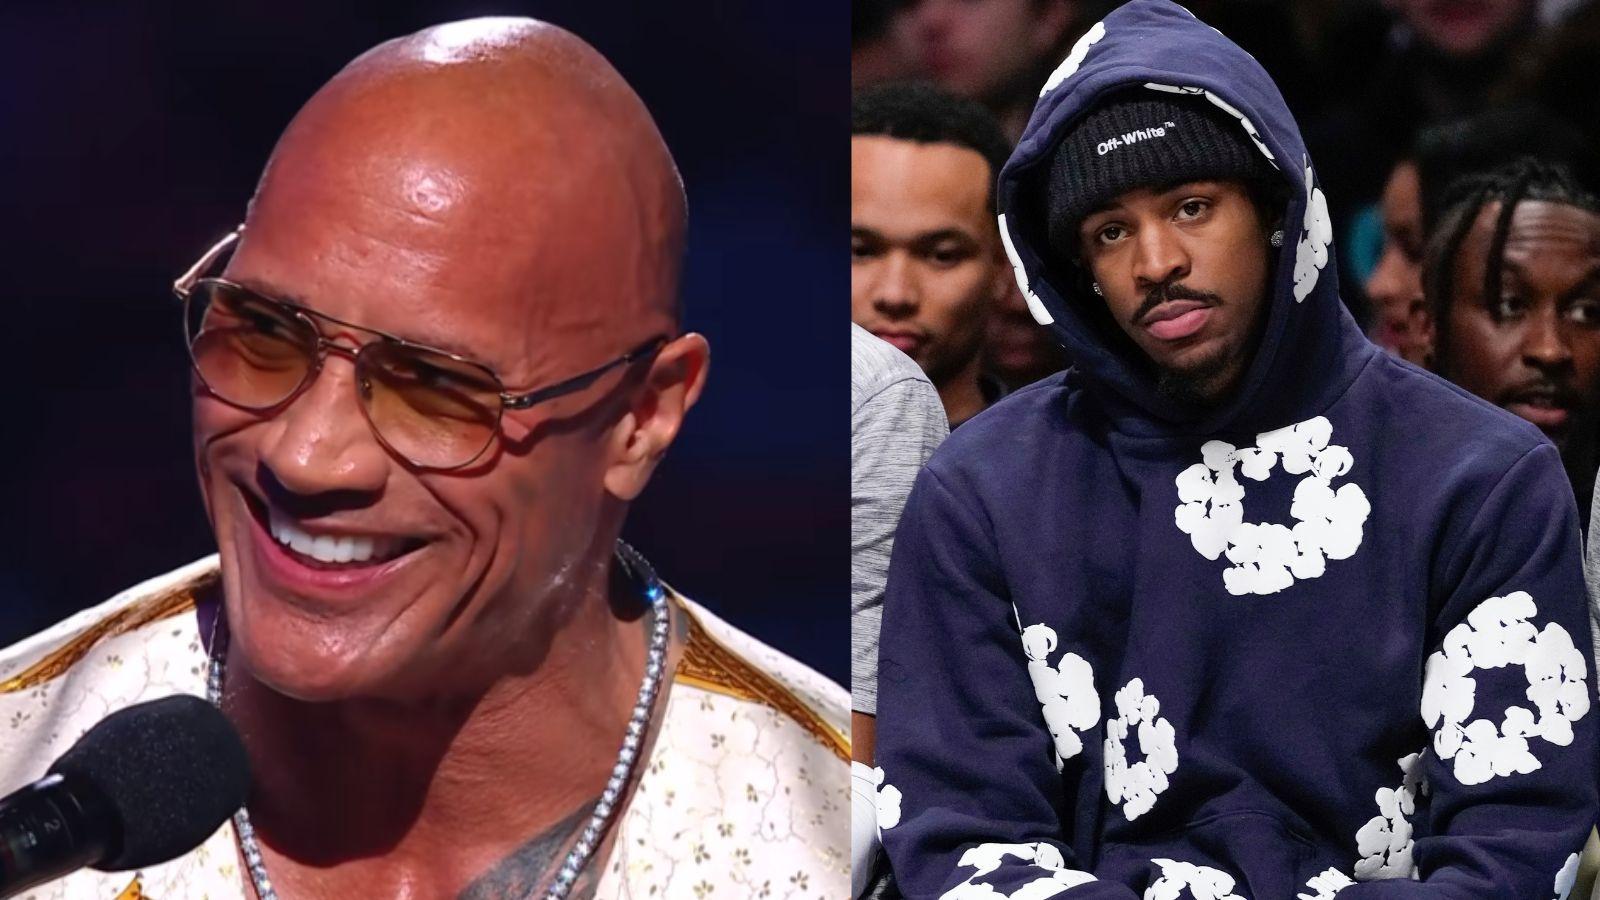 Dwayne "The Rock" Johnson during WWE Smackdown on 3/15 (left) and Ja Morant on the bench as a member of the Memphis Grizzlies (right).